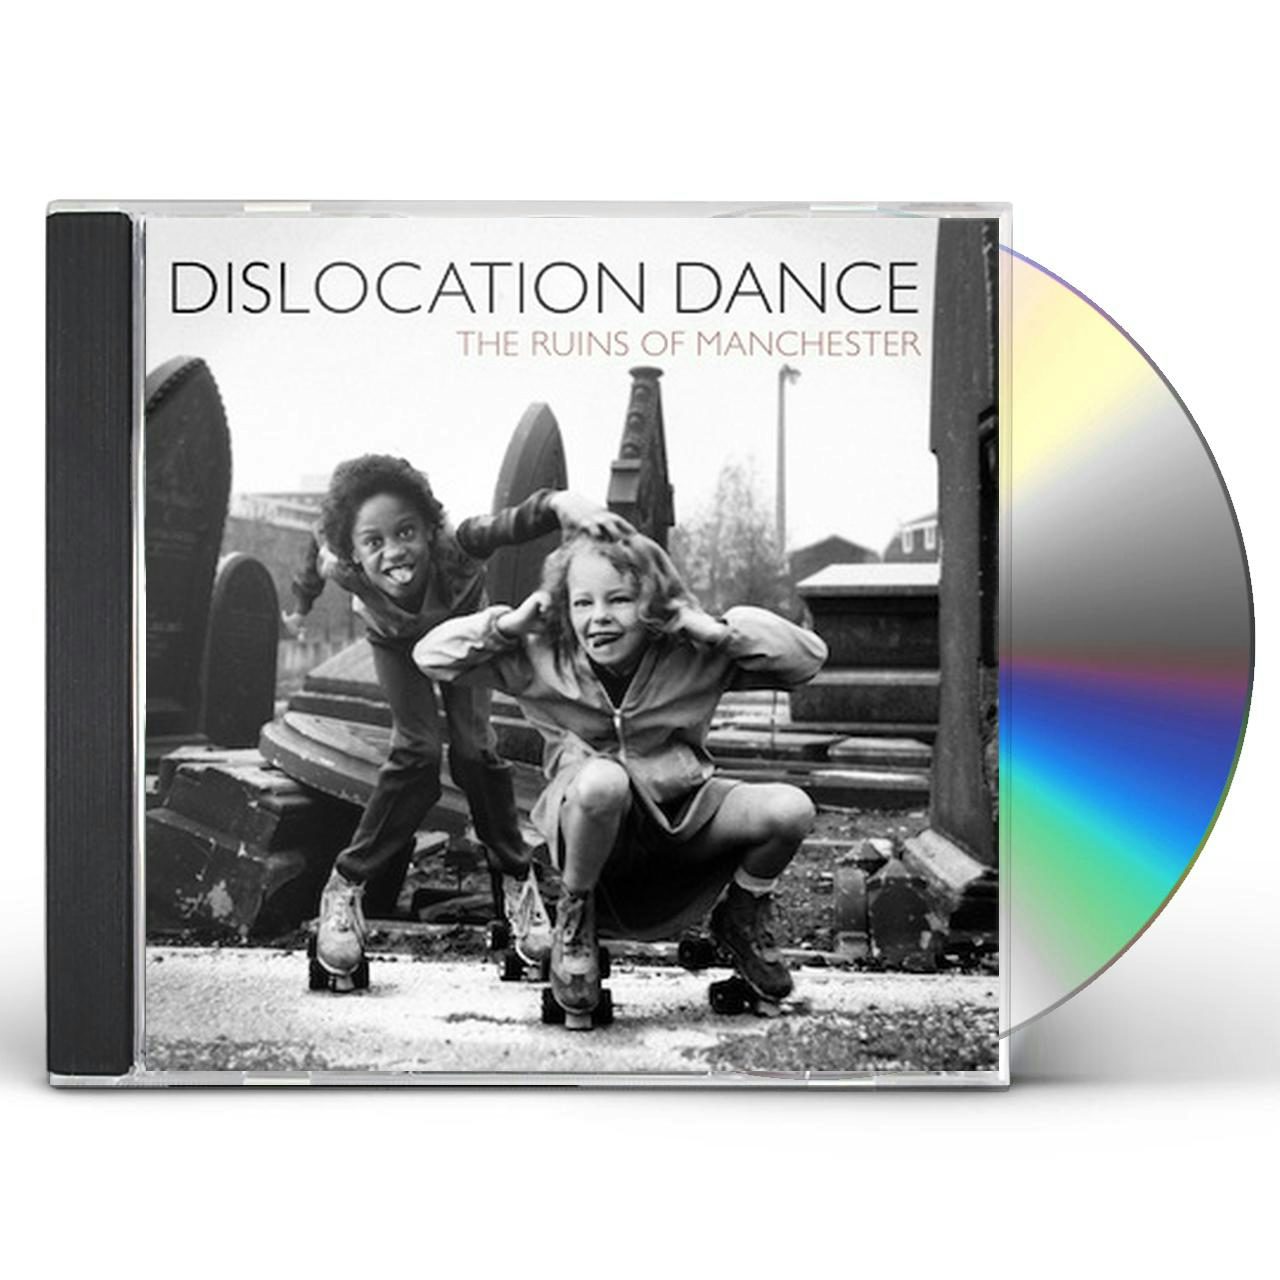 ruins of manchester / cromer cd - Dislocation Dance